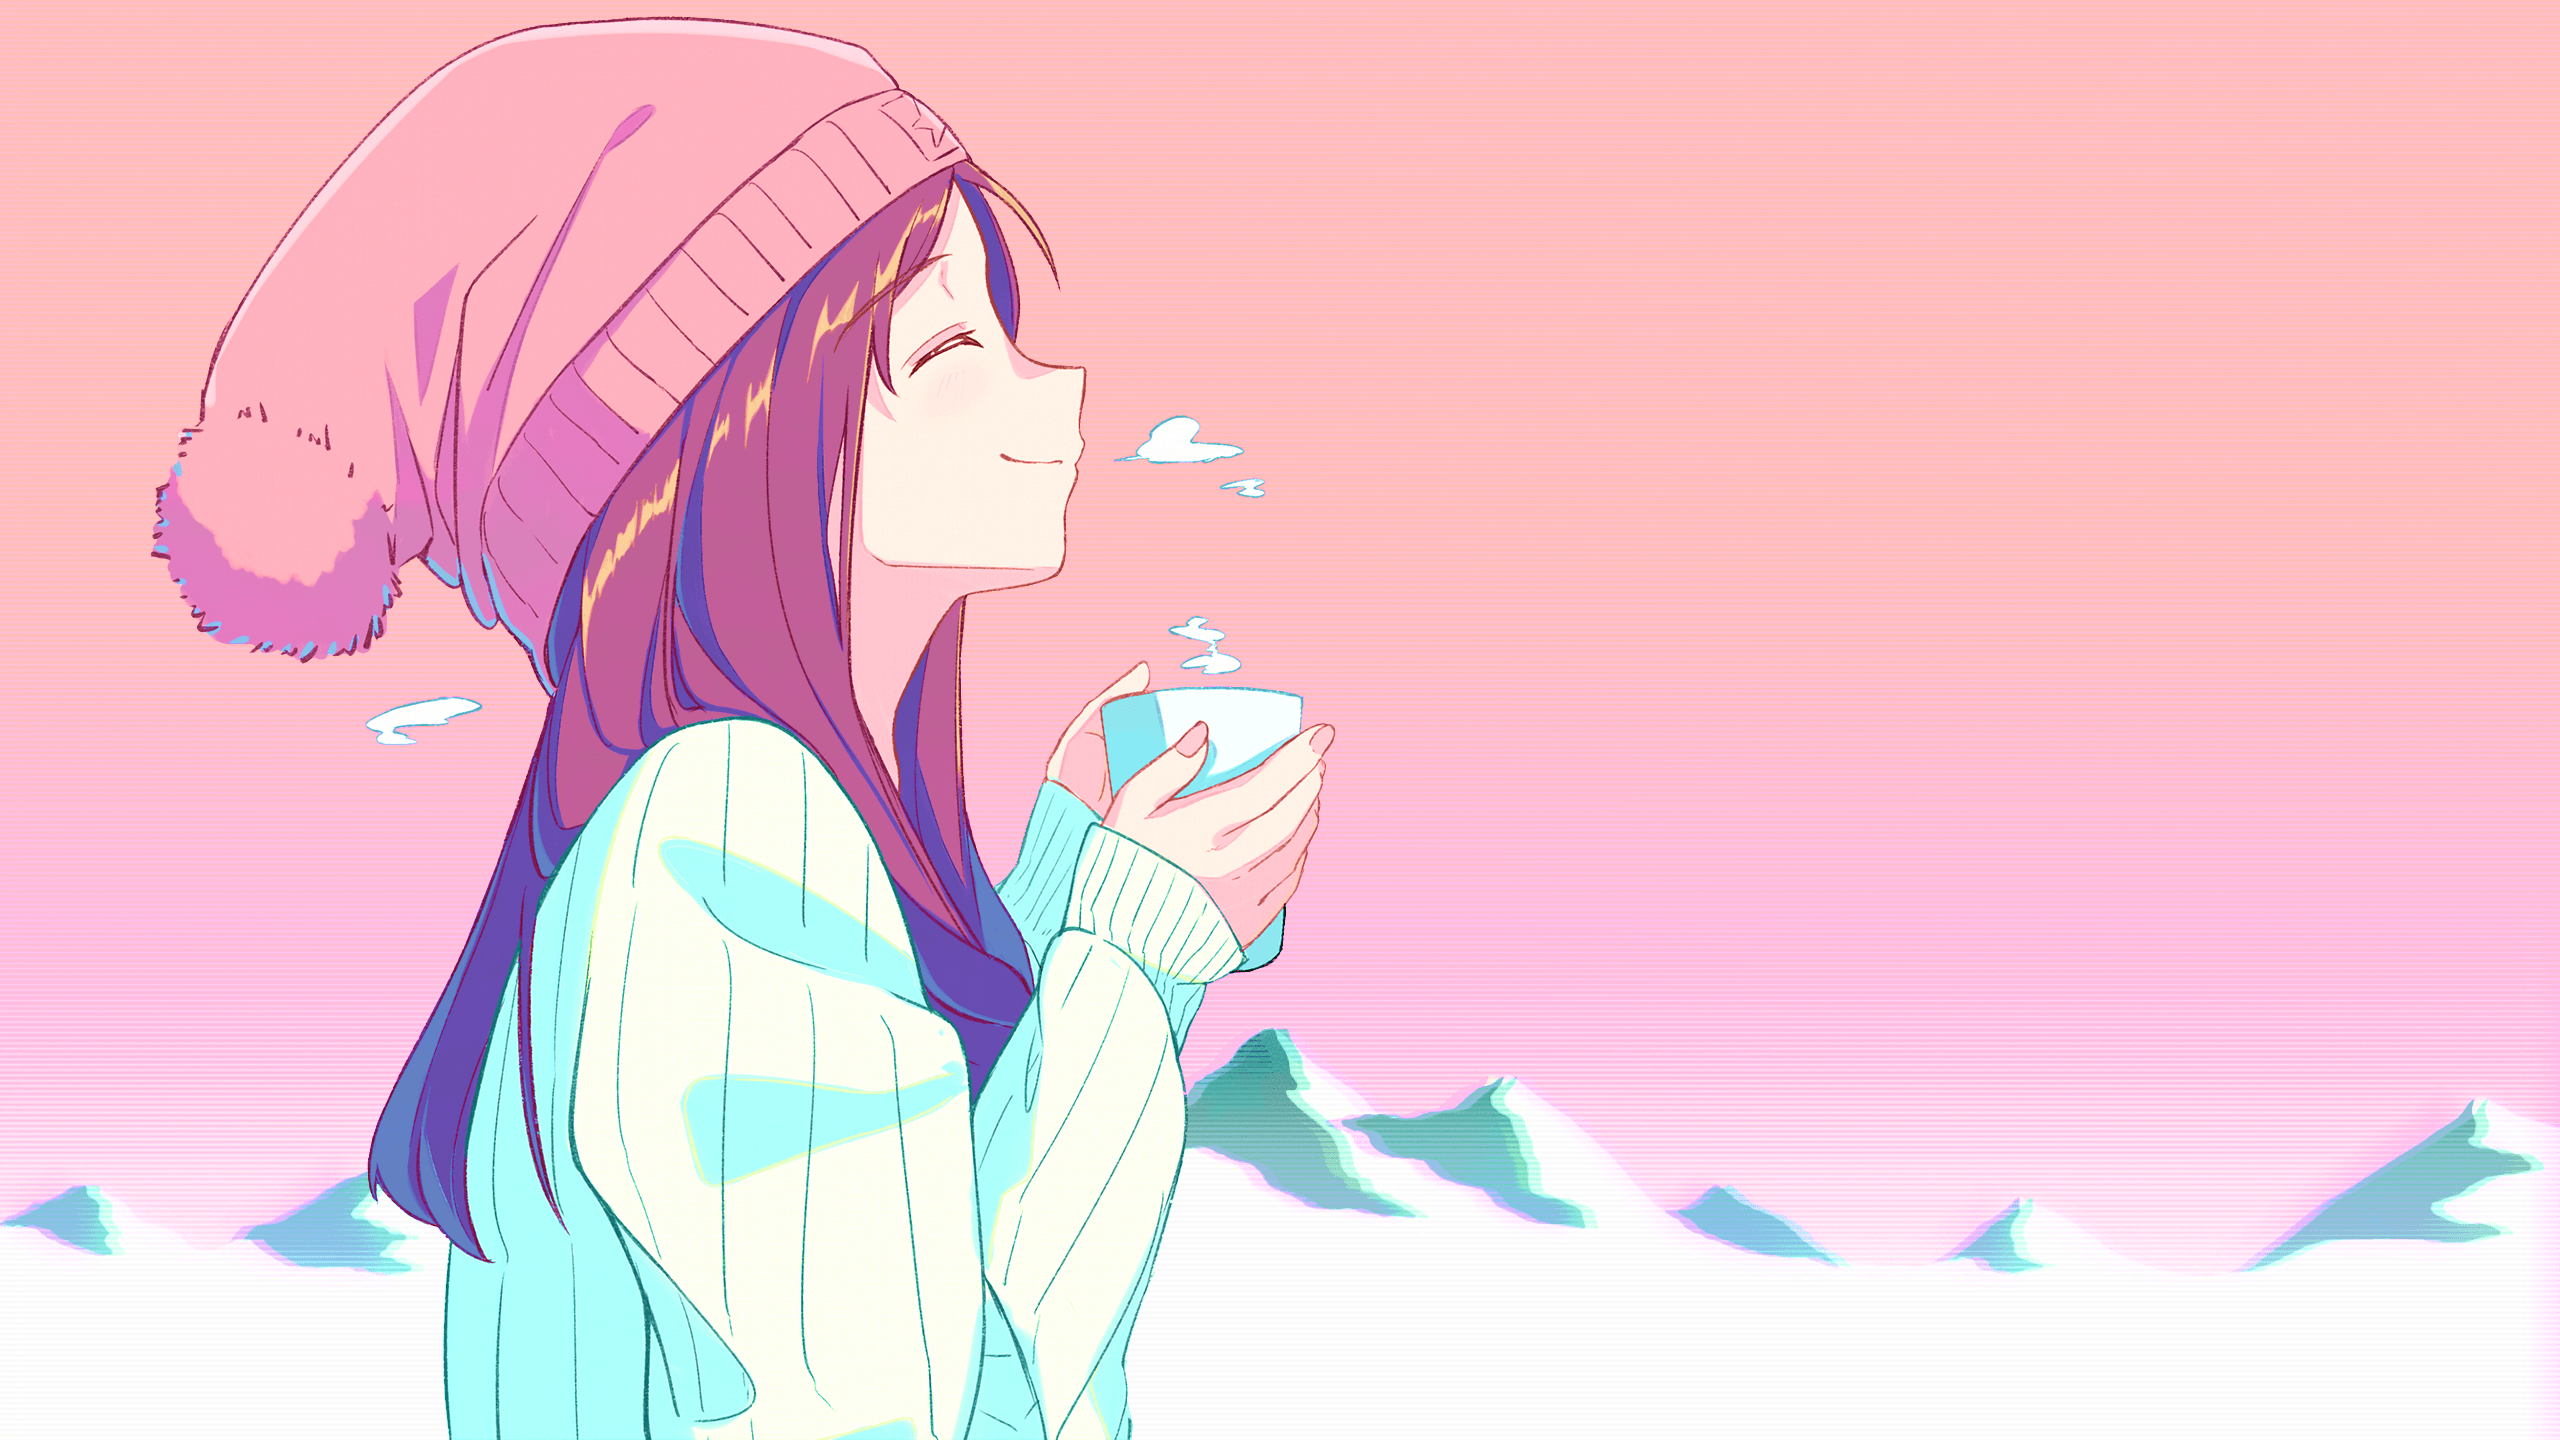 100+] 4k Aesthetic Anime Wallpapers | Wallpapers.com